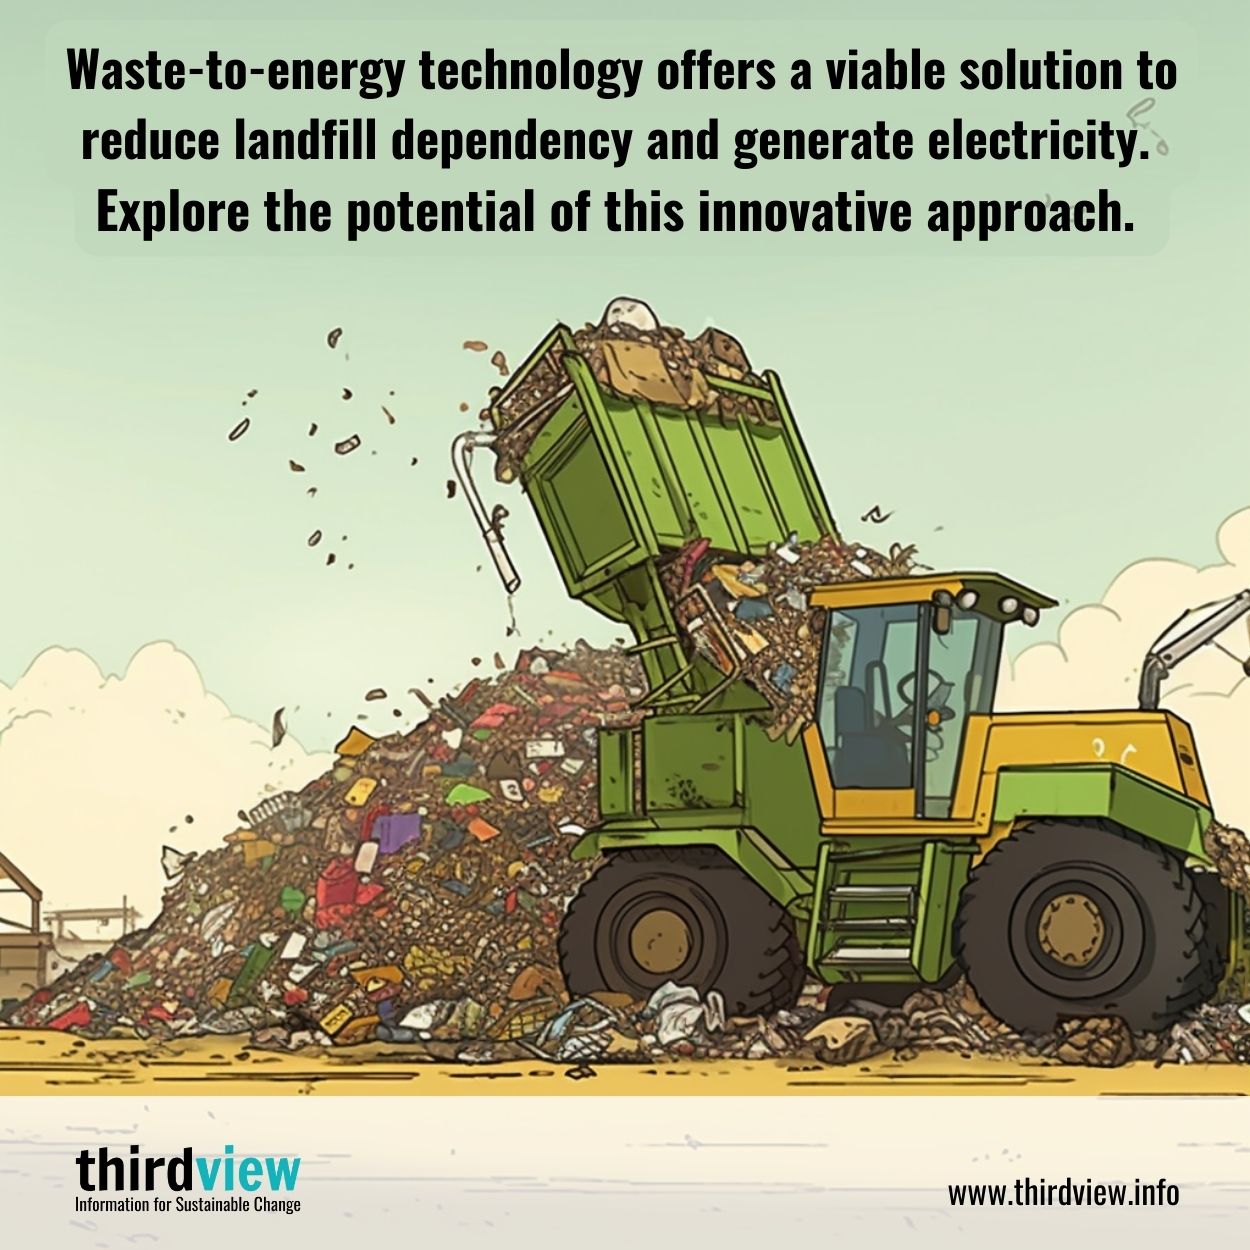 Waste-to-energy technology offers a viable solution to reduce landfill dependency and generate electricity. Explore the potential of this innovative approach.